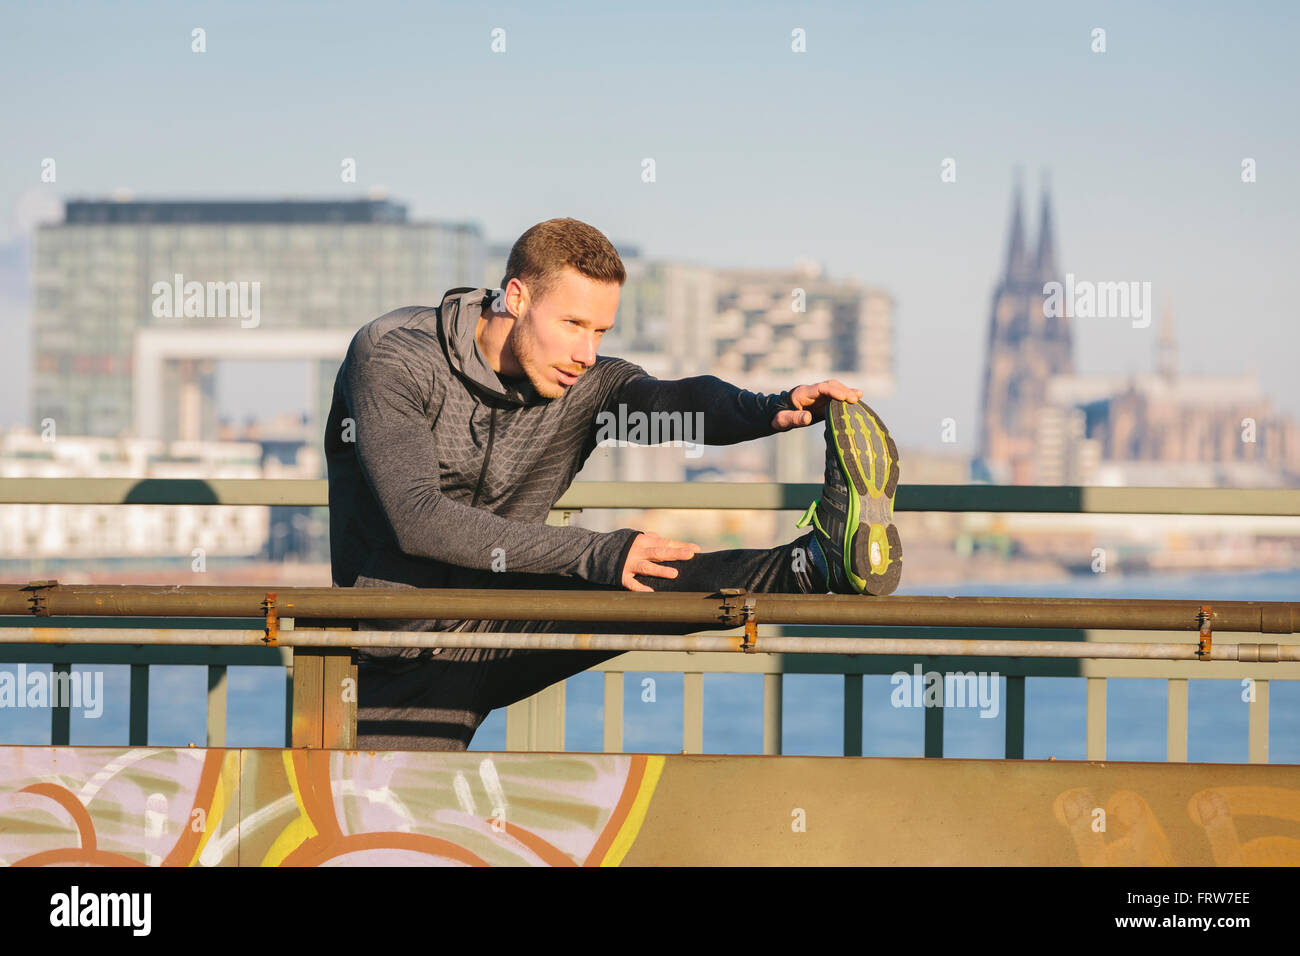 Germany, Cologne, Young man worming up for workout Stock Photo